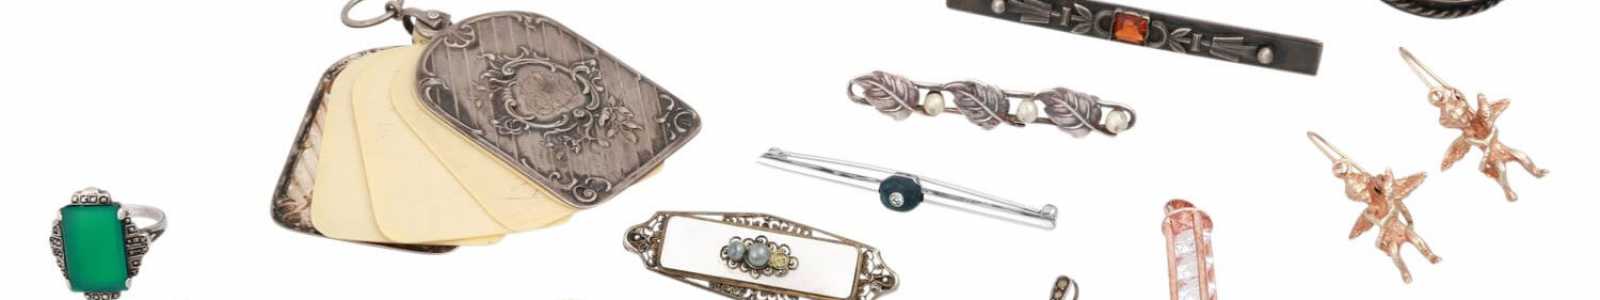 Jewelry, watches, porcelain, silver, luxury watches & accessories